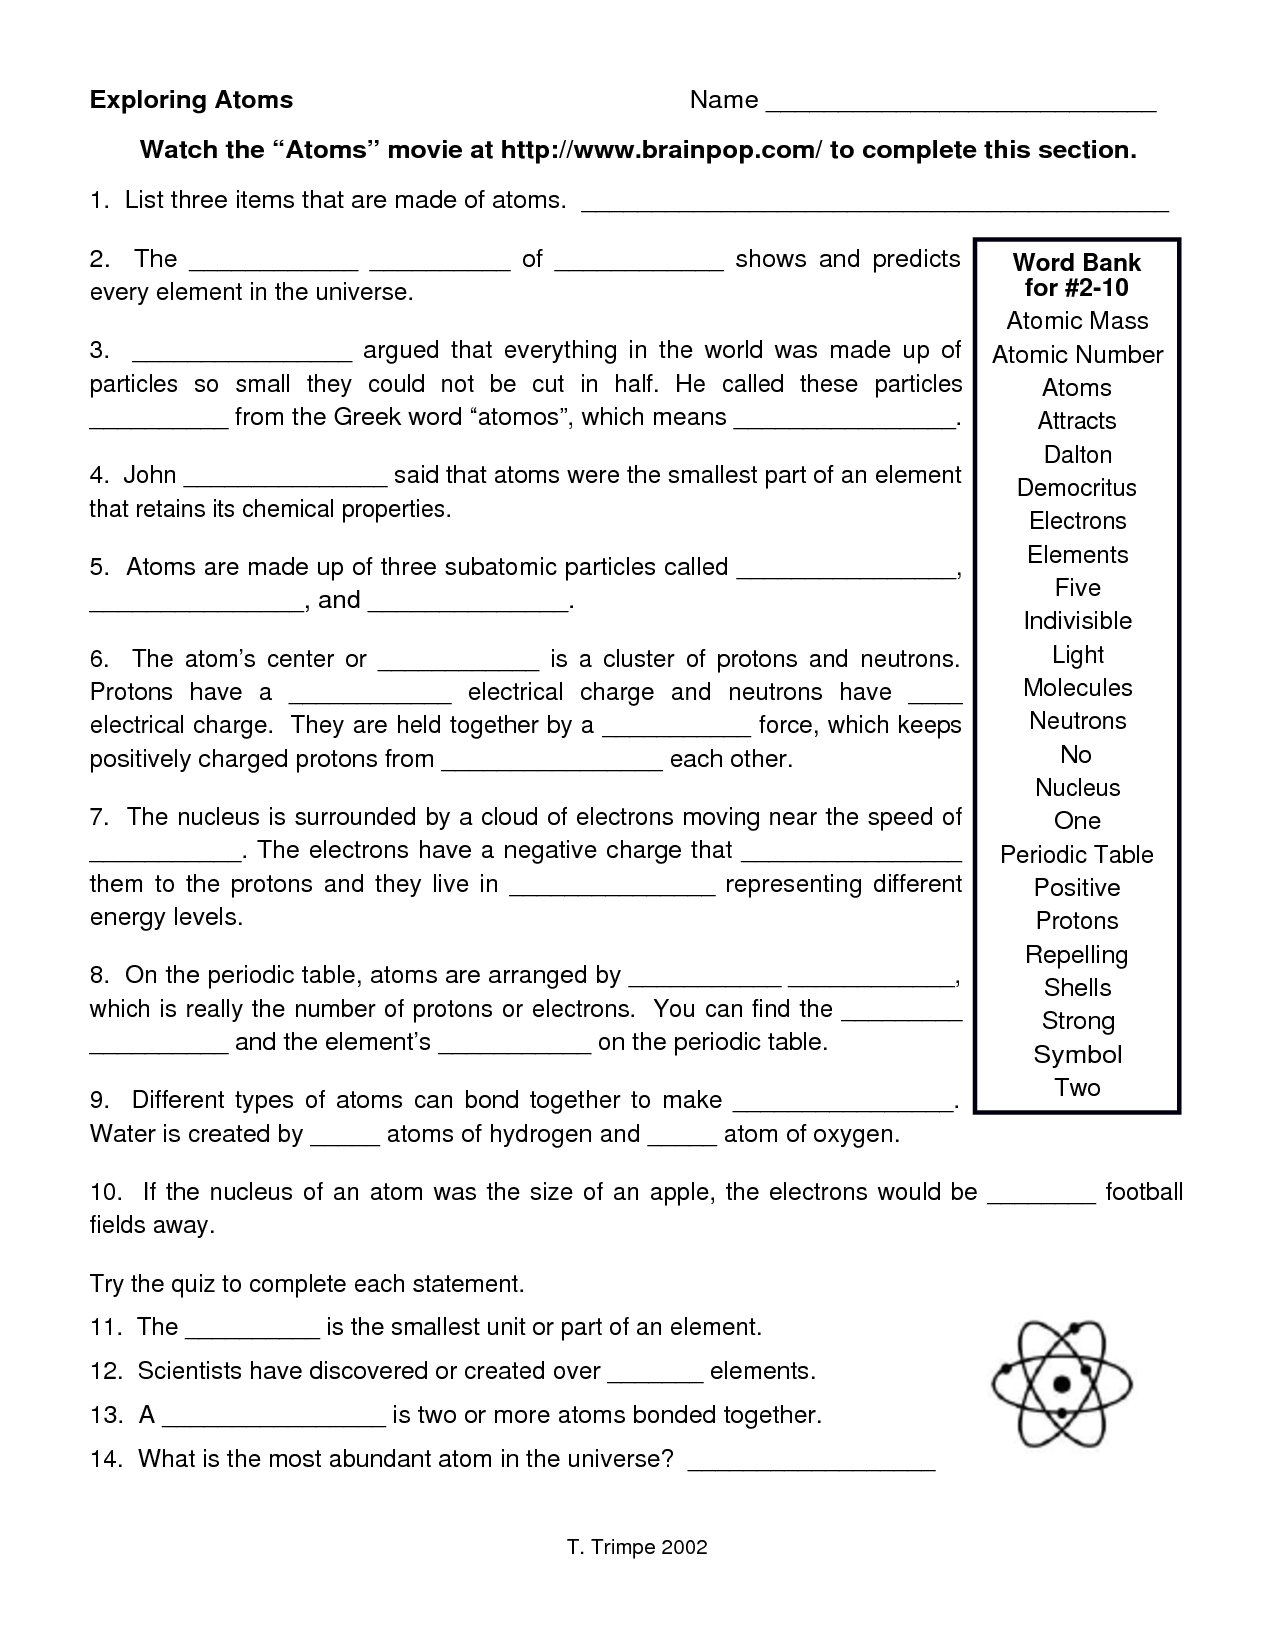 Atoms and Molecules Worksheet Answers